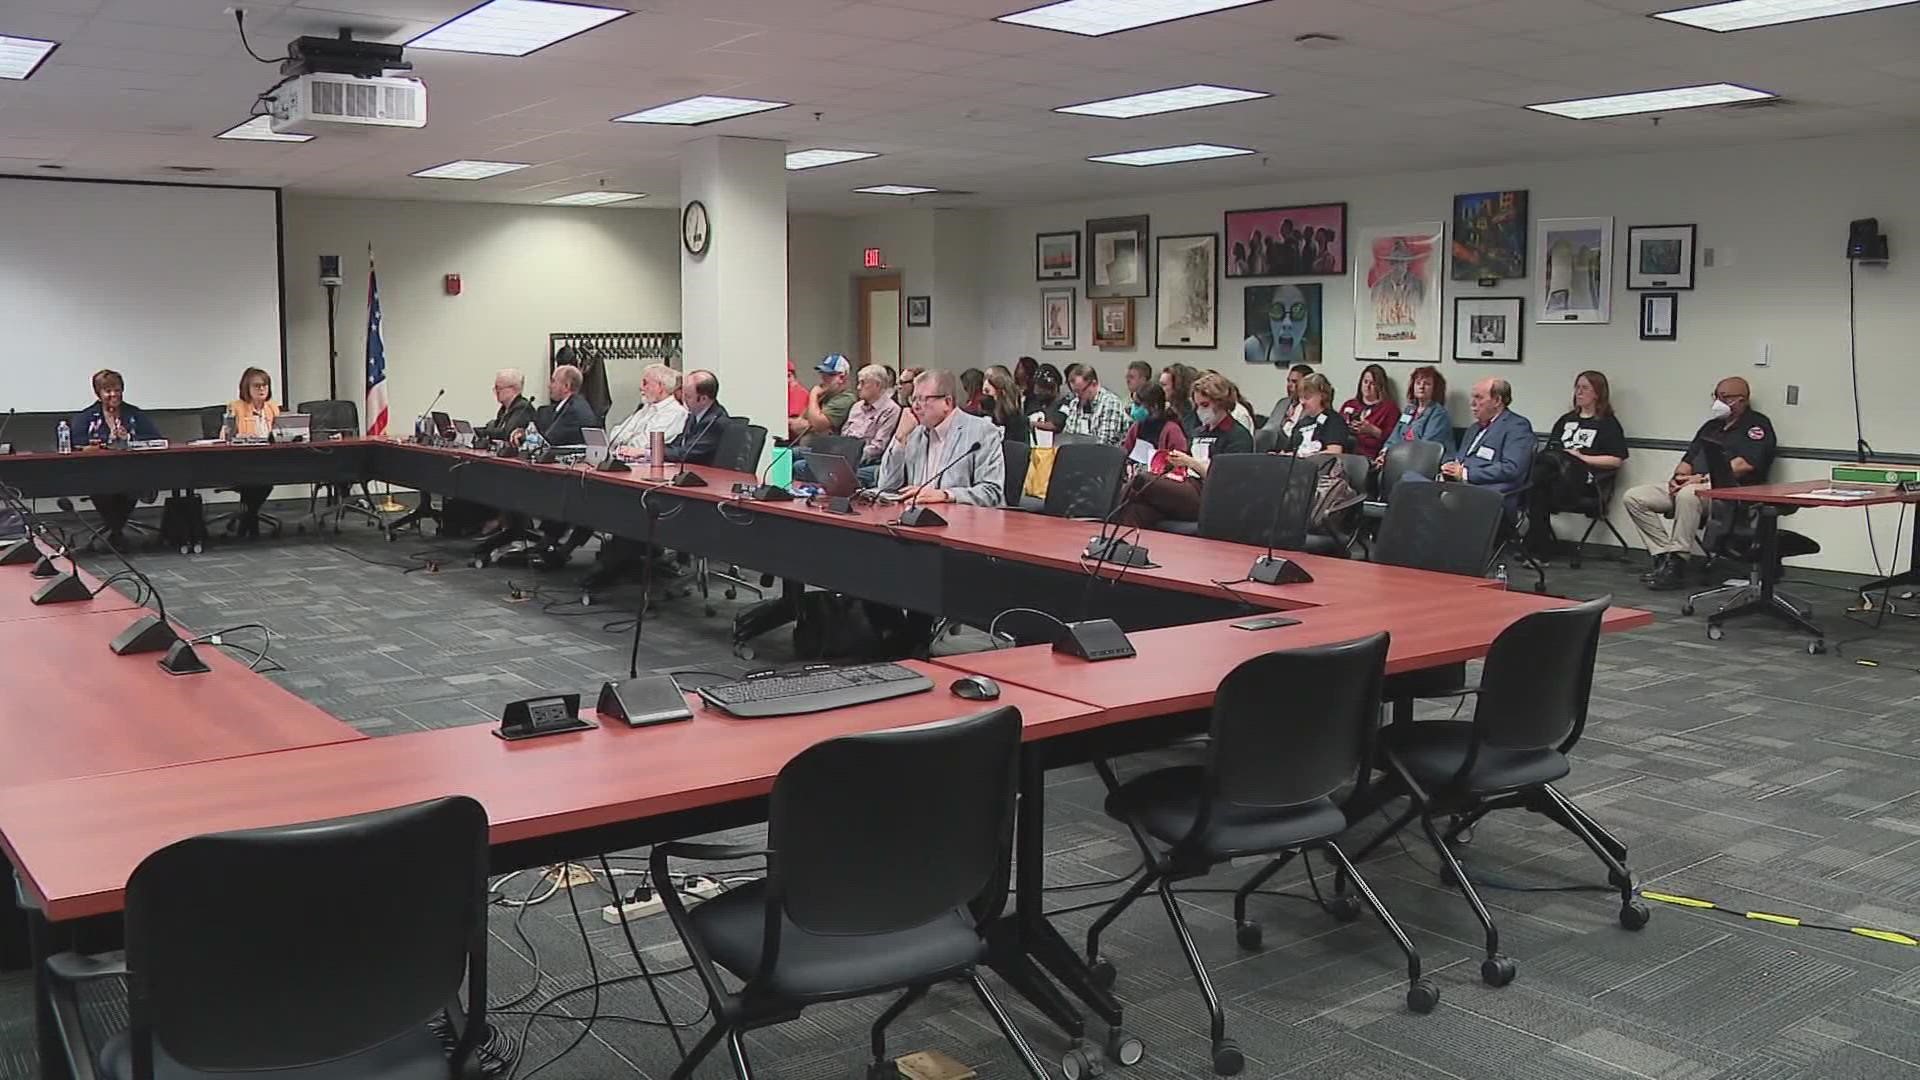 The Ohio Board of Education will meet again next month to decide on a resolution that would protect children who identify as LGBTQ+.